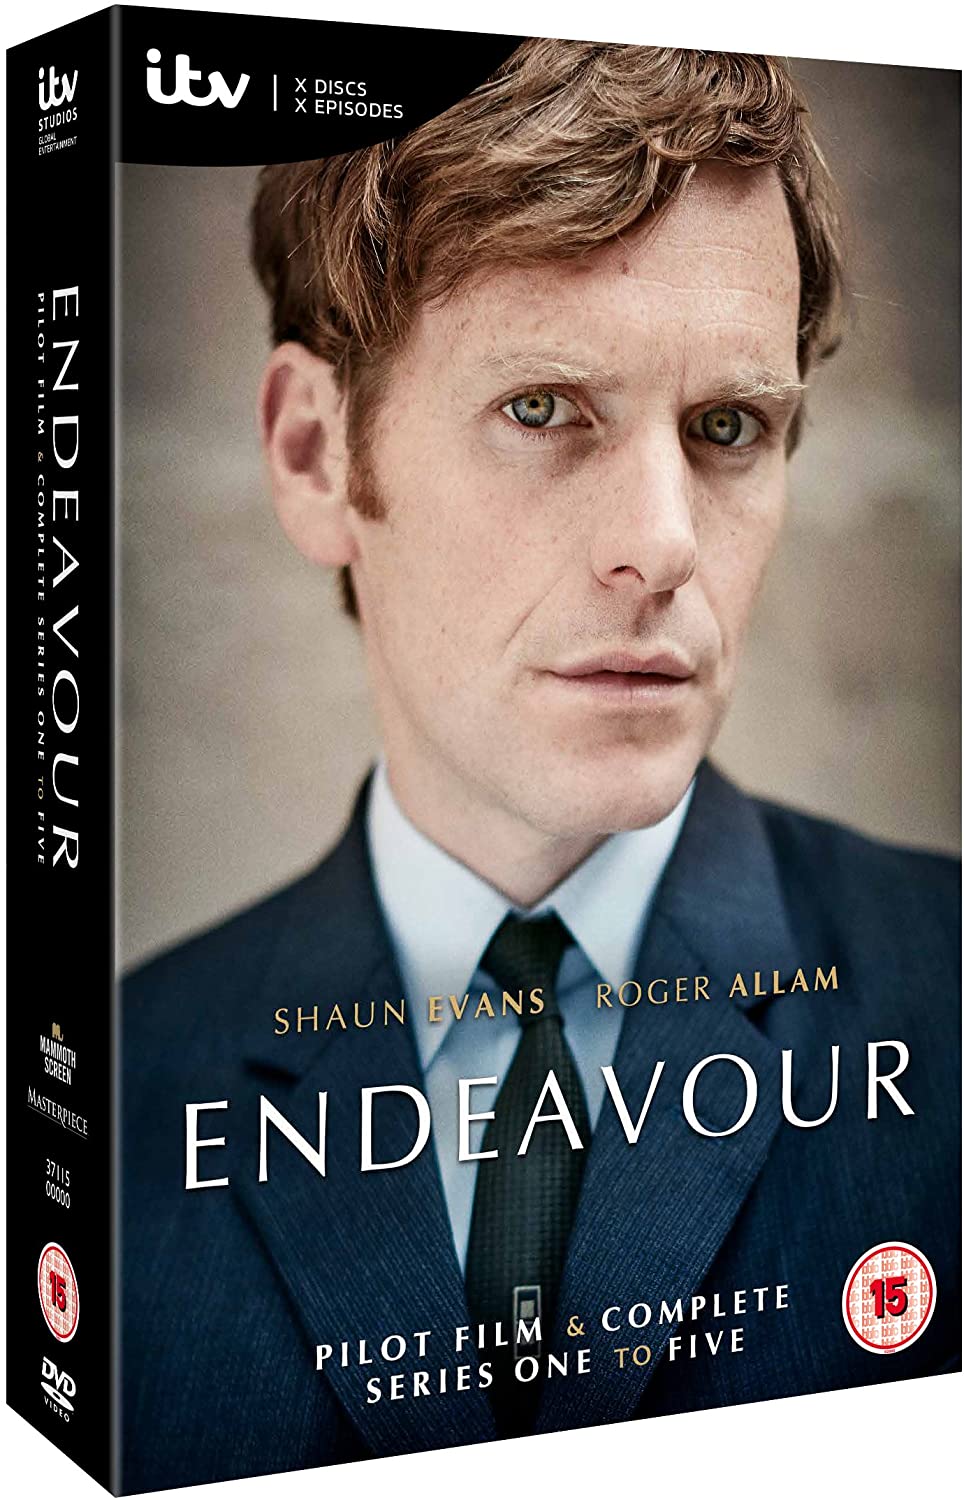 Endeavour Series 1-5 [2018] - Mystery [DVD]